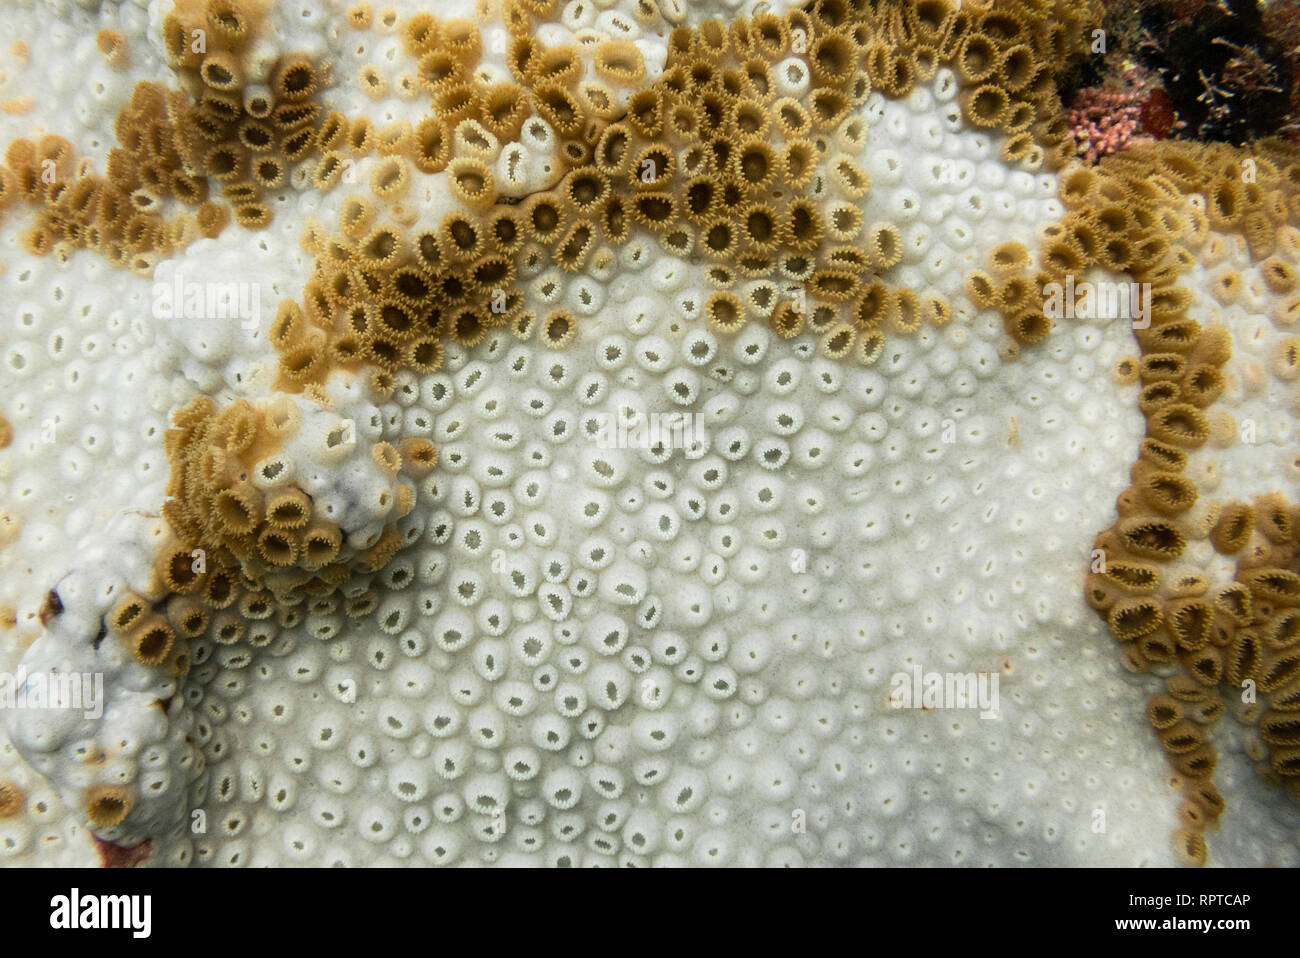 Palythoa caribaeorum coral showing strong signs of coral bleaching/whitening, from SE Brazil, Ilhabela Stock Photo